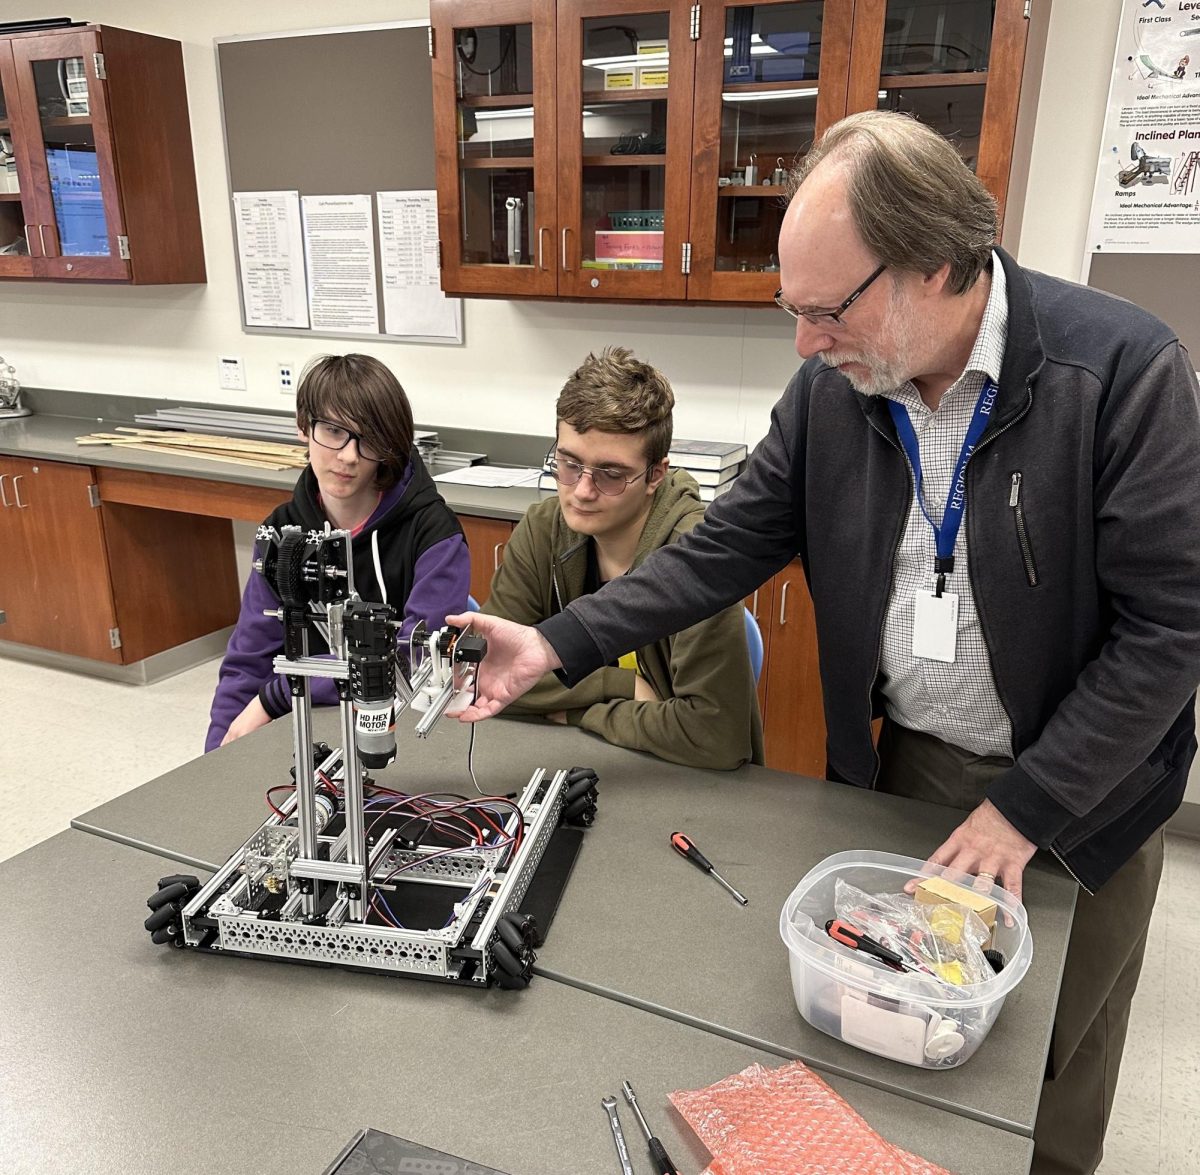 William Pease, Nonnewaug science faculty and club advisor for robotics, seen here attaching crucial pieces onto this robot with Jack Braddock Colin Palaia.